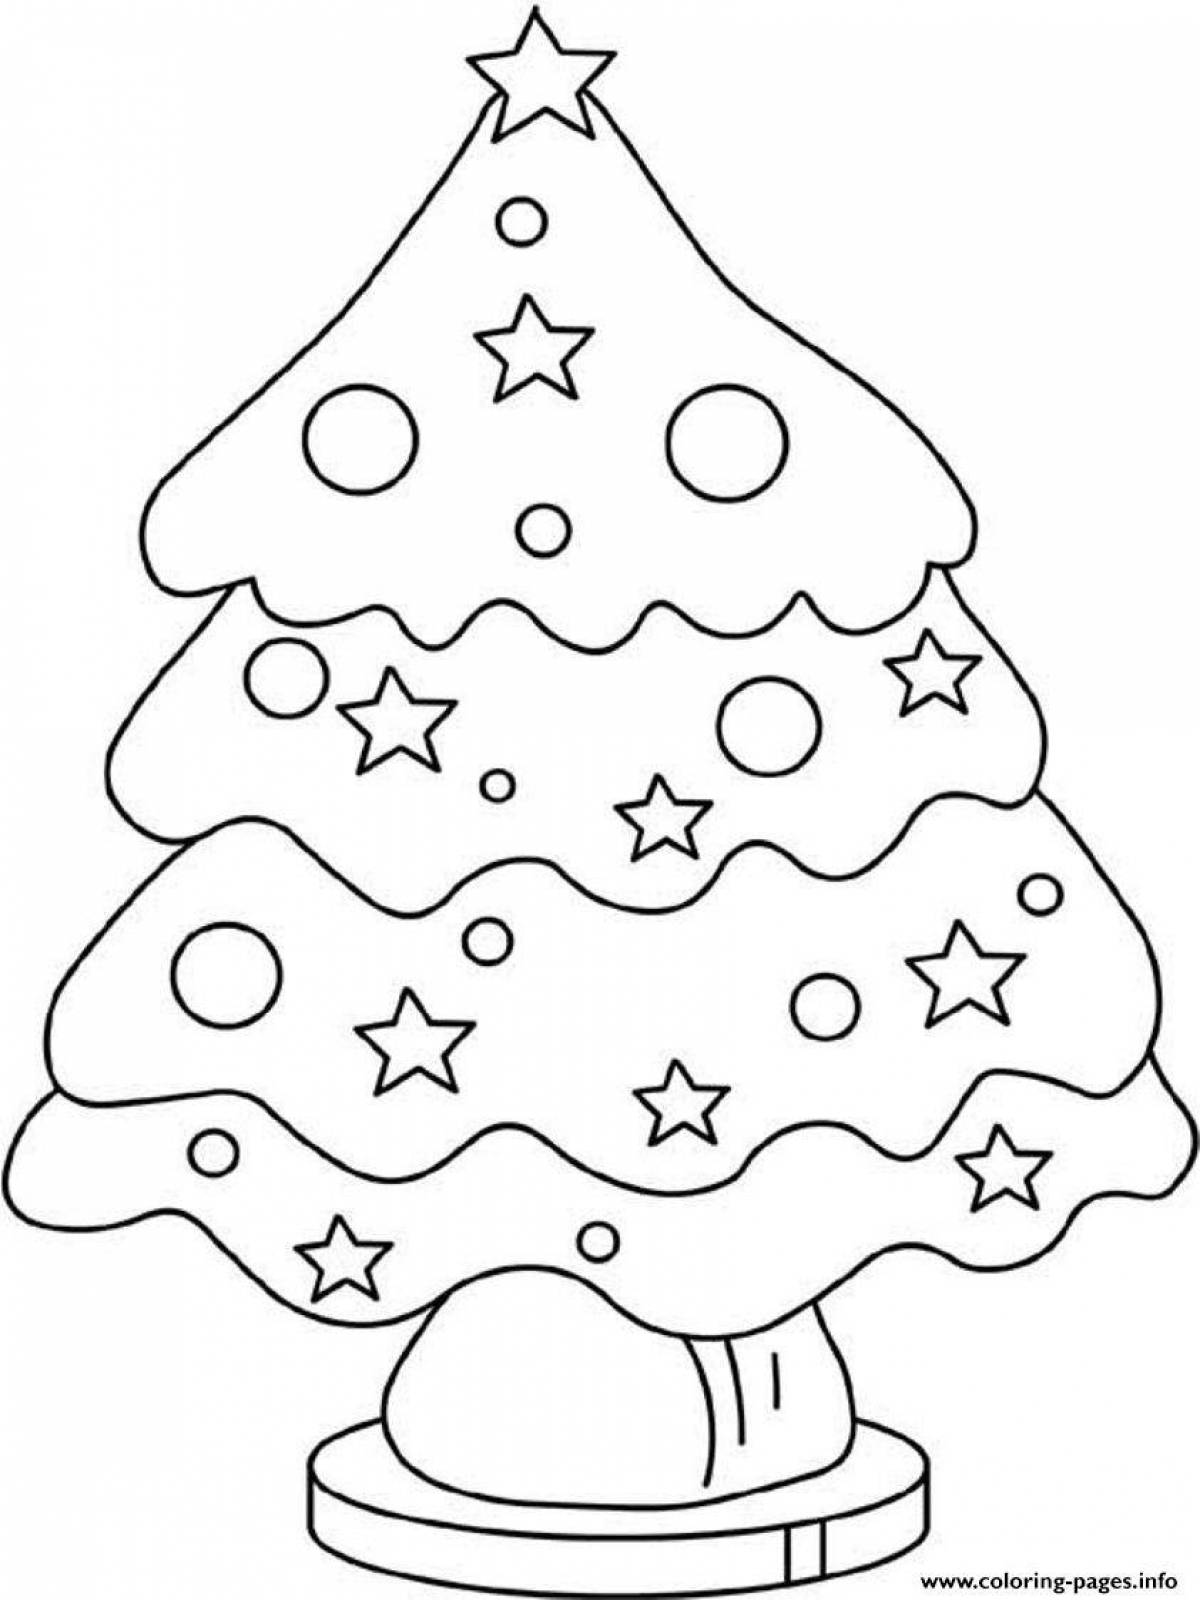 Colorful Christmas tree coloring book for 2-3 year olds